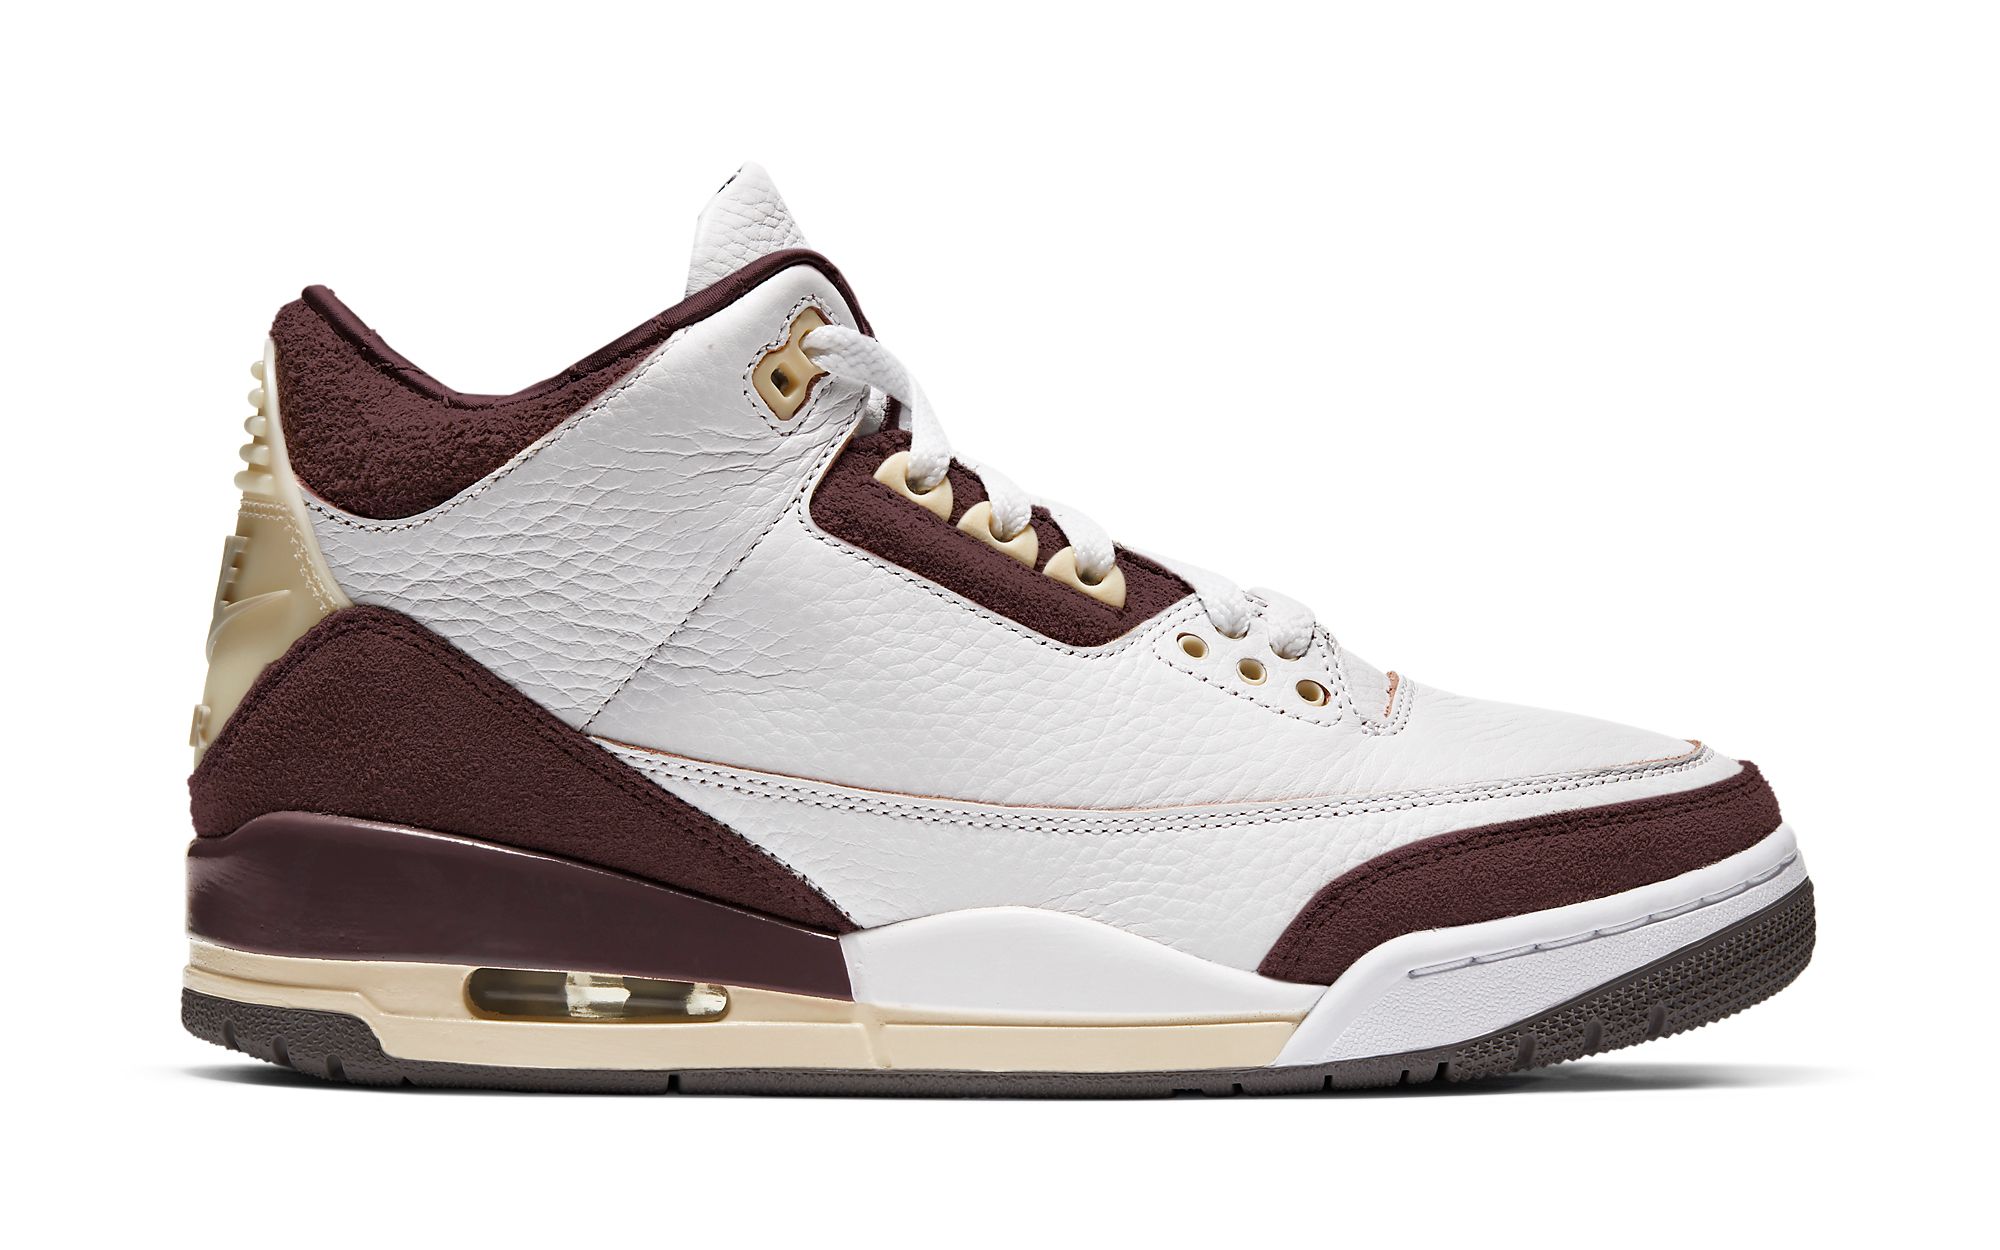 A Ma Maniére to Release New Air Jordan 3 and 4 Colorways in 